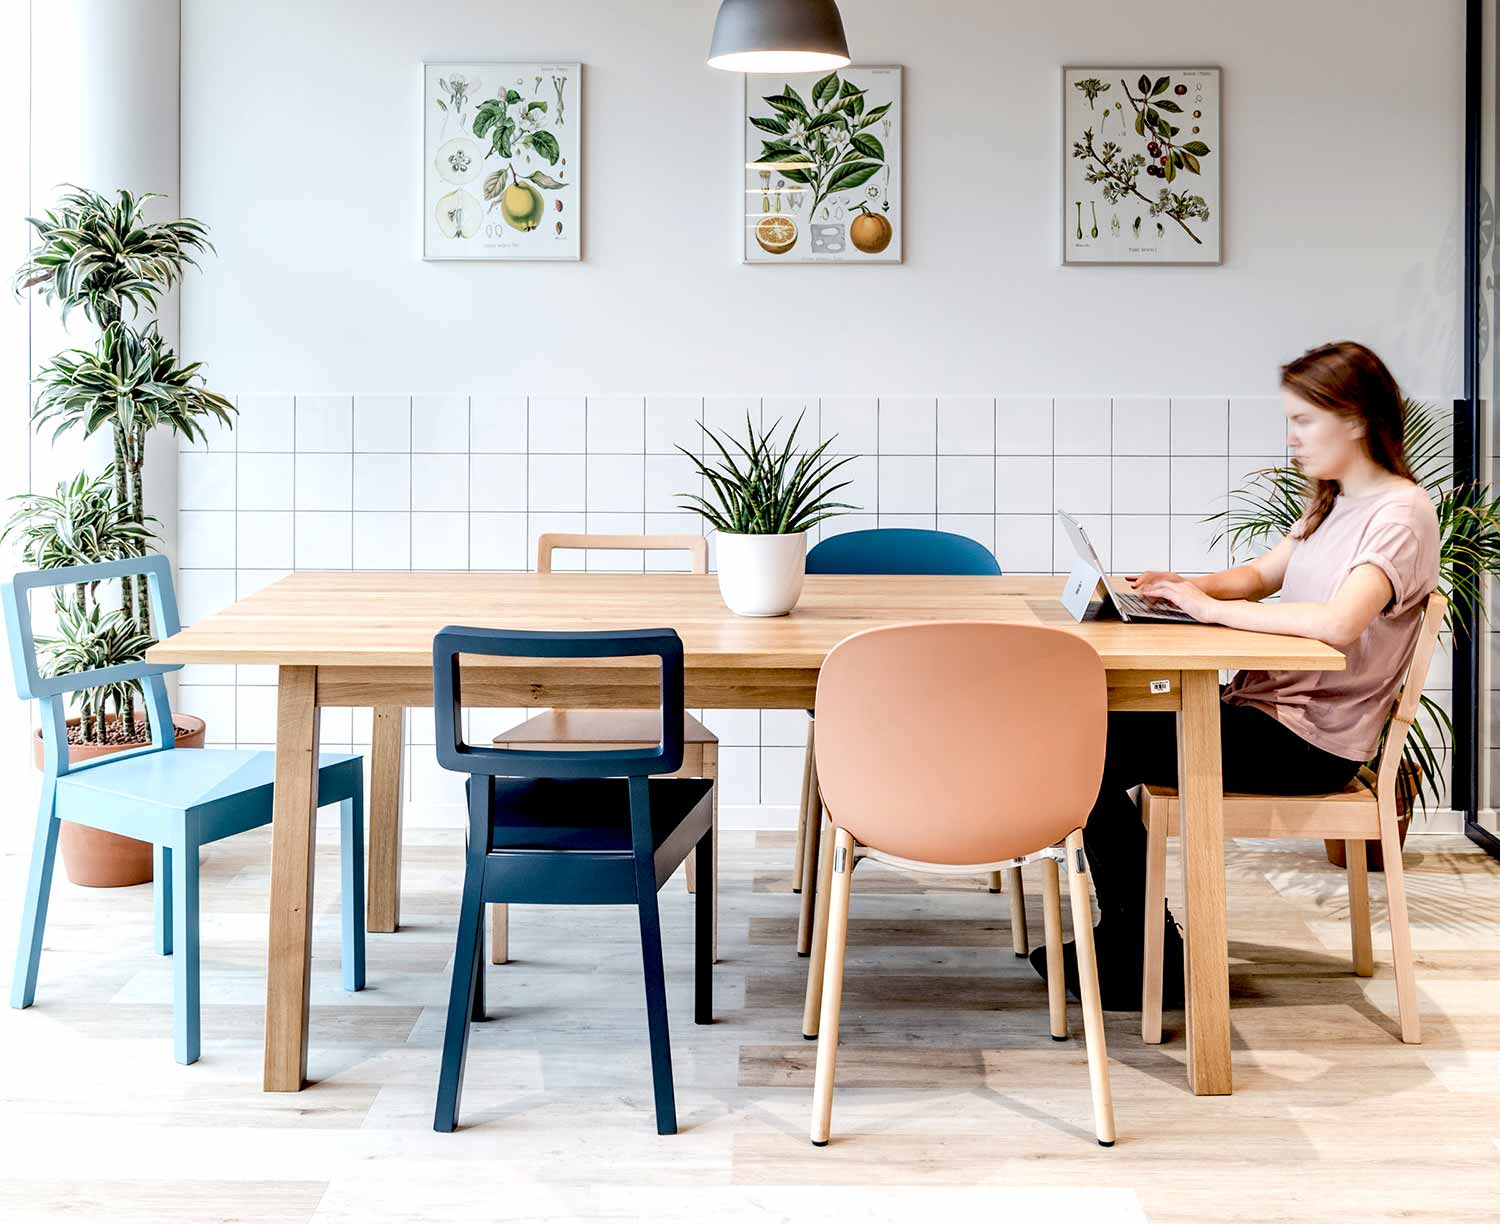 Bright scandinavian style cafeteria space in office featuring Coral RBM Noor chair with wooden legs